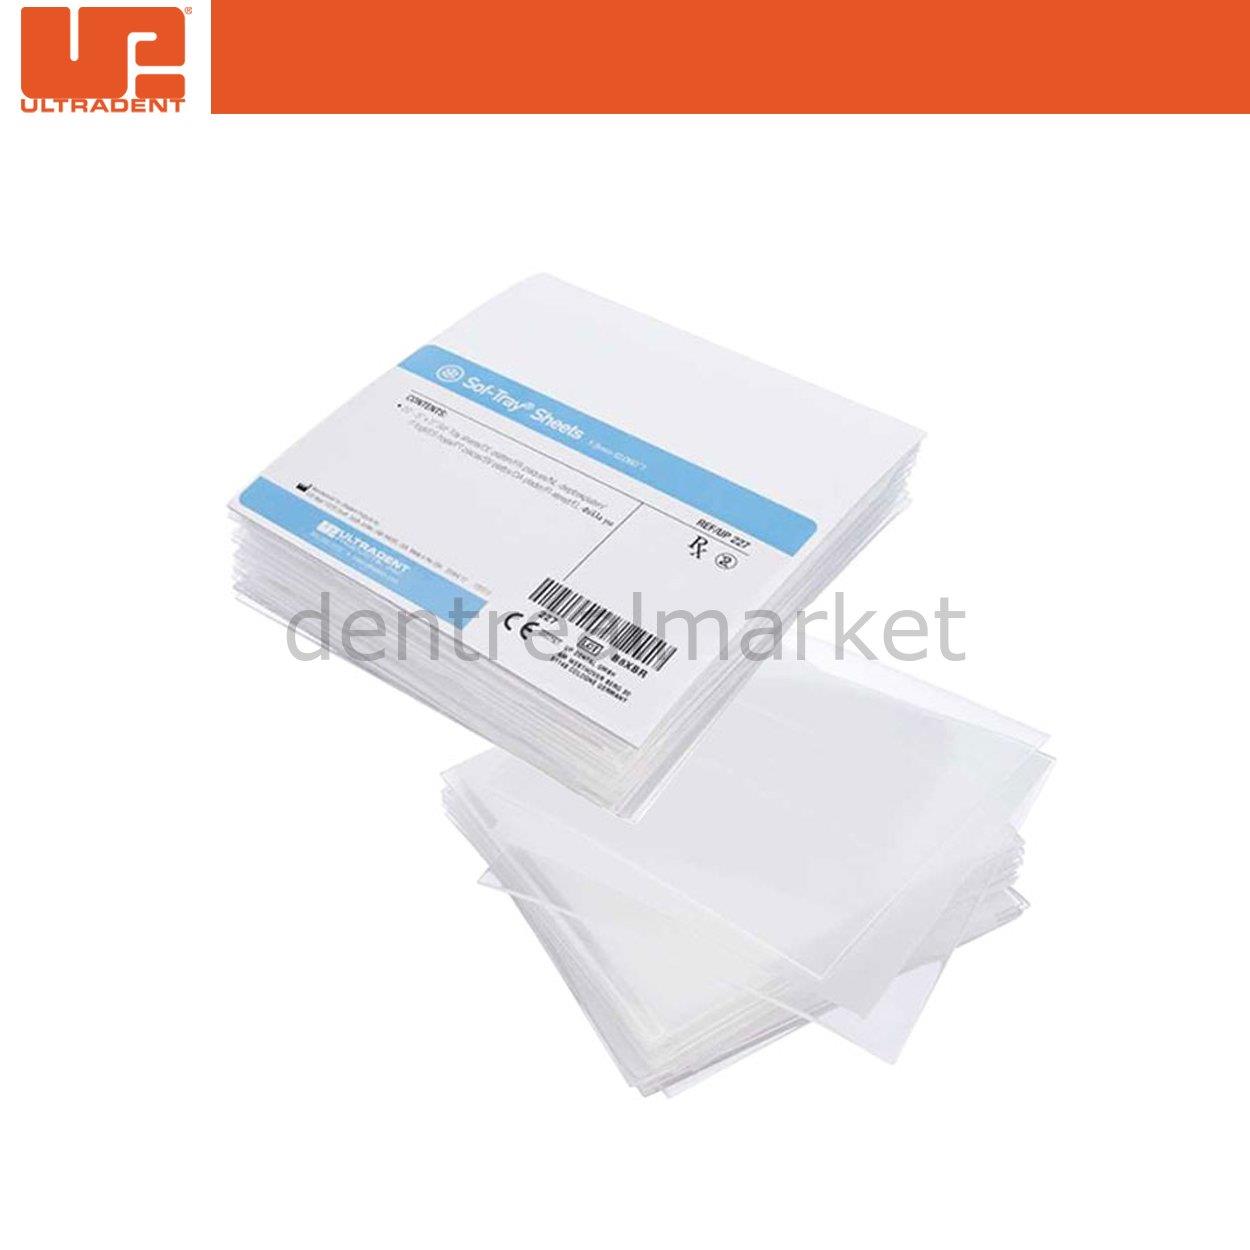 DentrealStore - Ultradent Sof-Tray Sheet Material for Vacuum-Forming of Trays